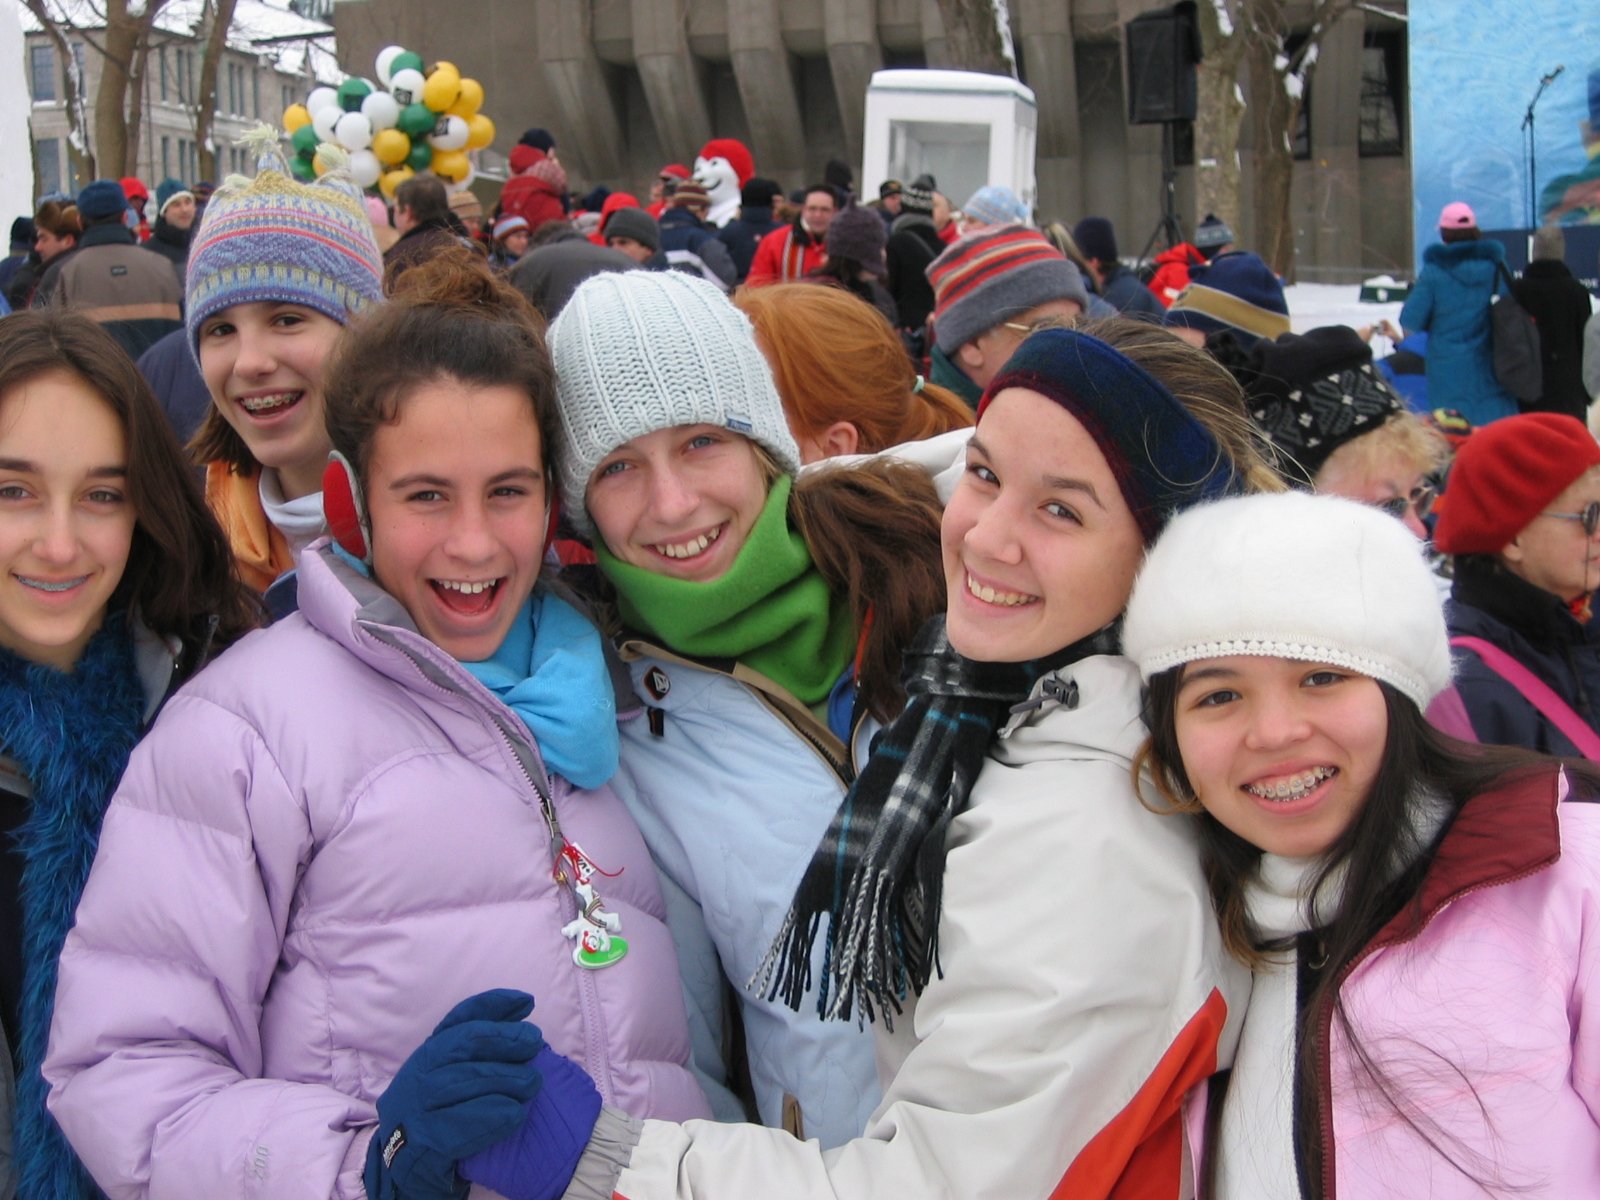 Group picture at the Quebec City Carnival